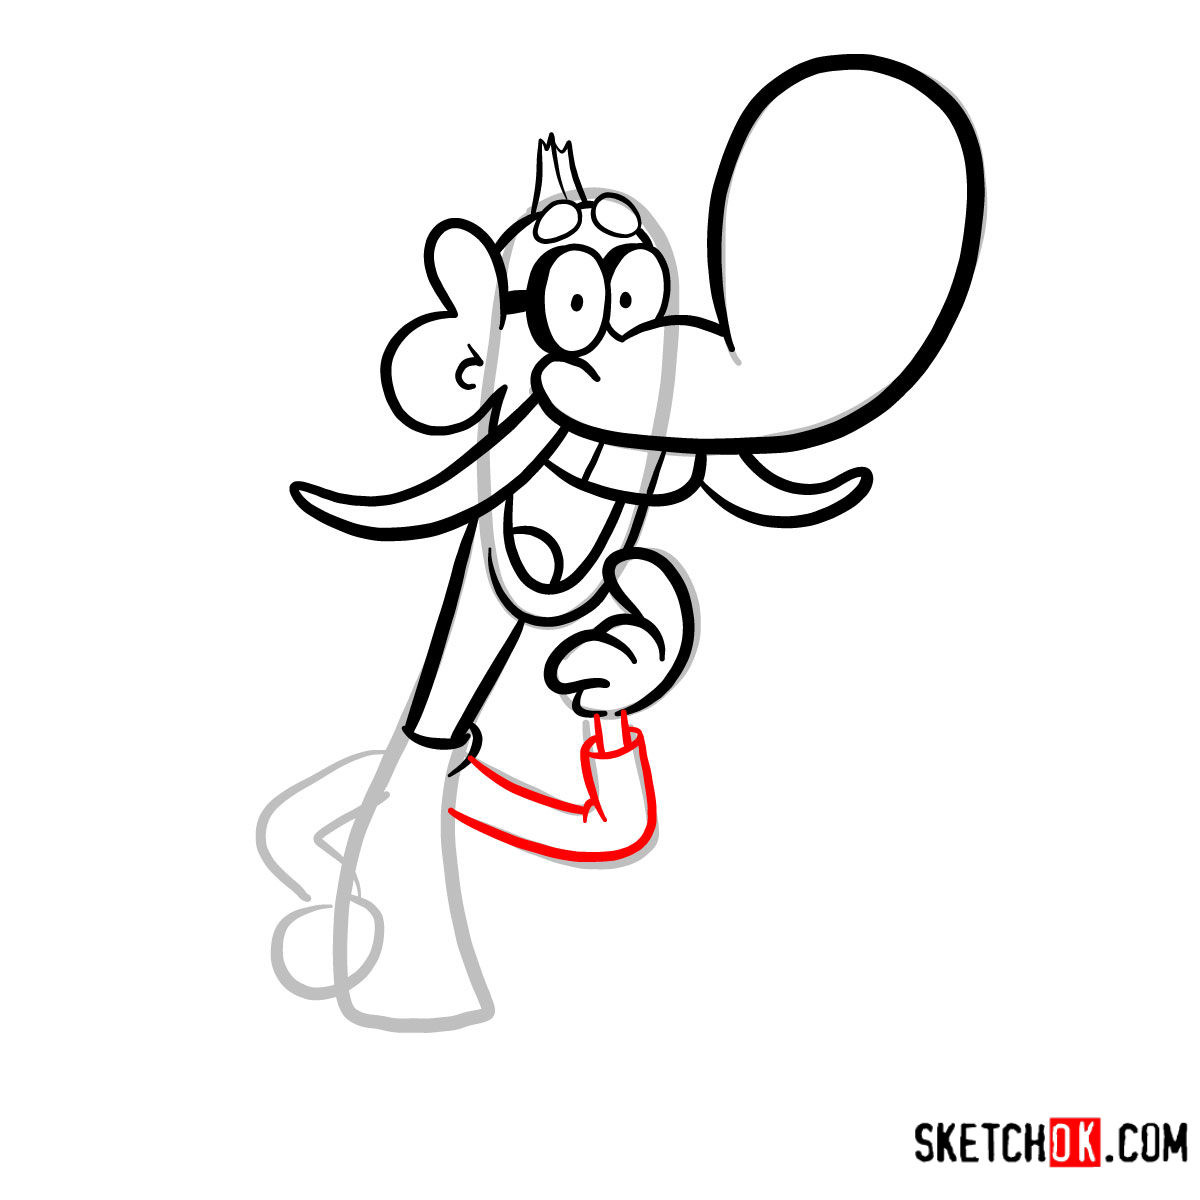 How to draw Mung Daal from Chowder series - step 07